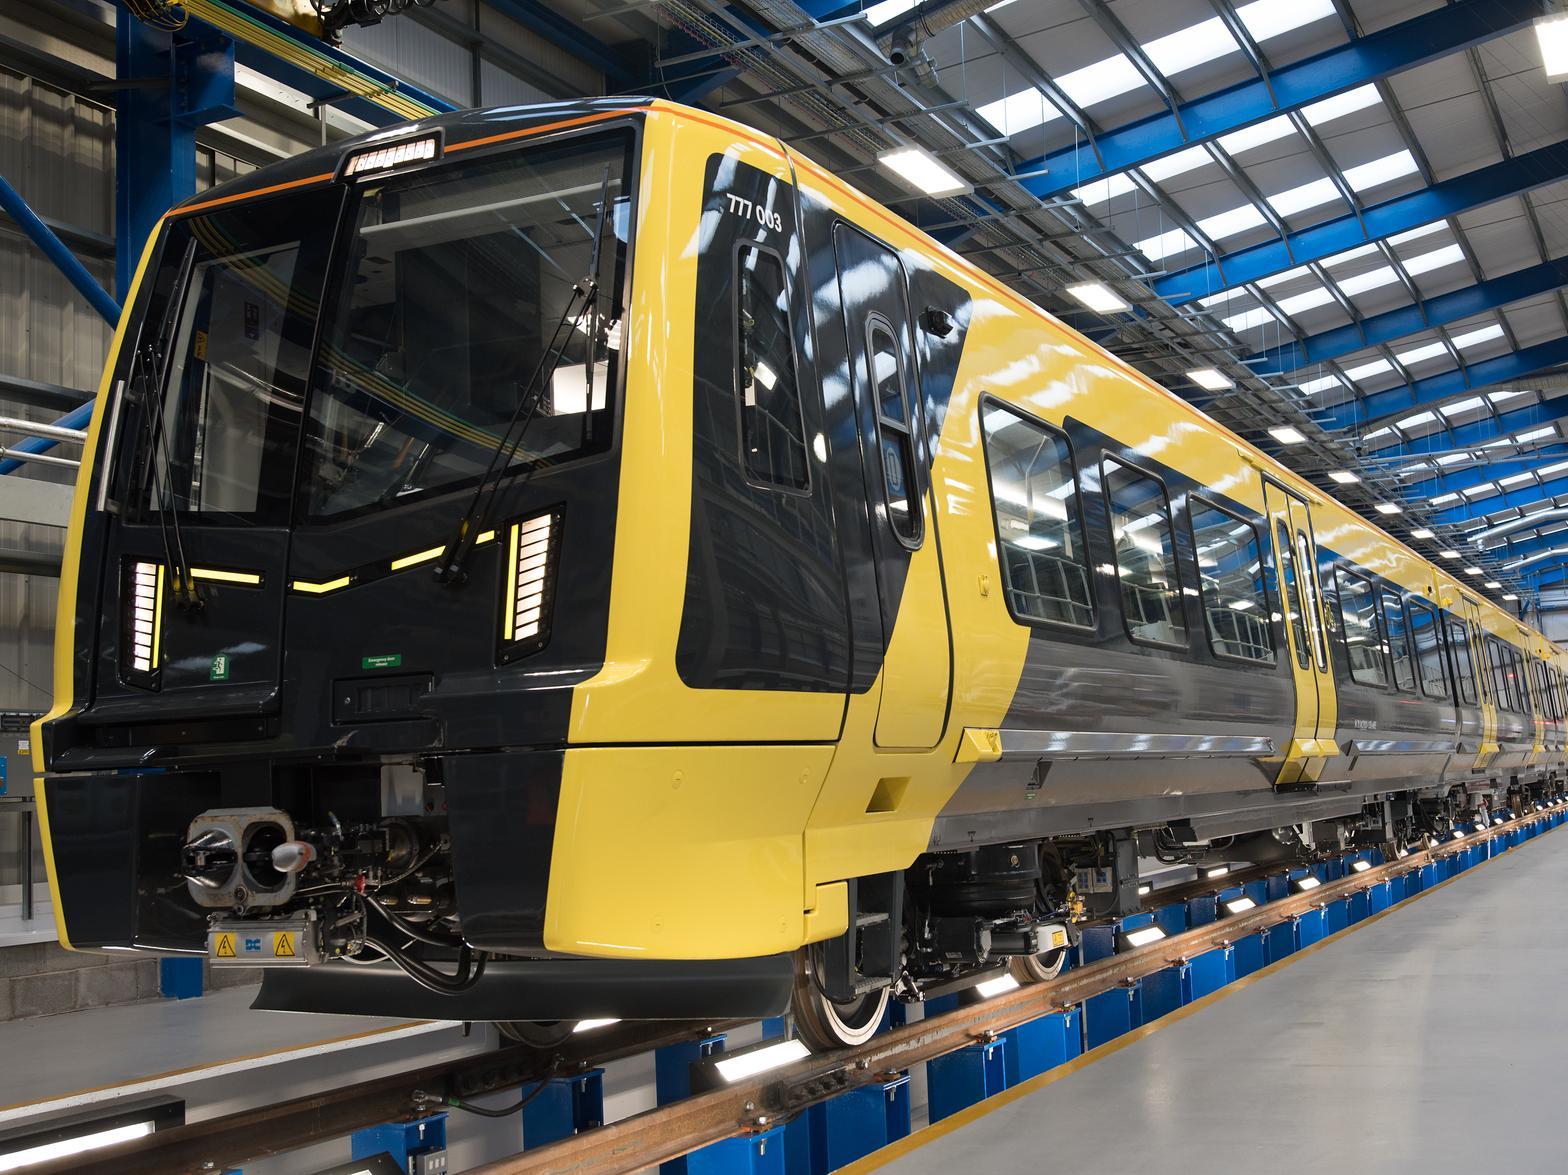 Rollout of £500m fleet of new Merseyrail trains moves step closer as RMT Union guard dispute settled